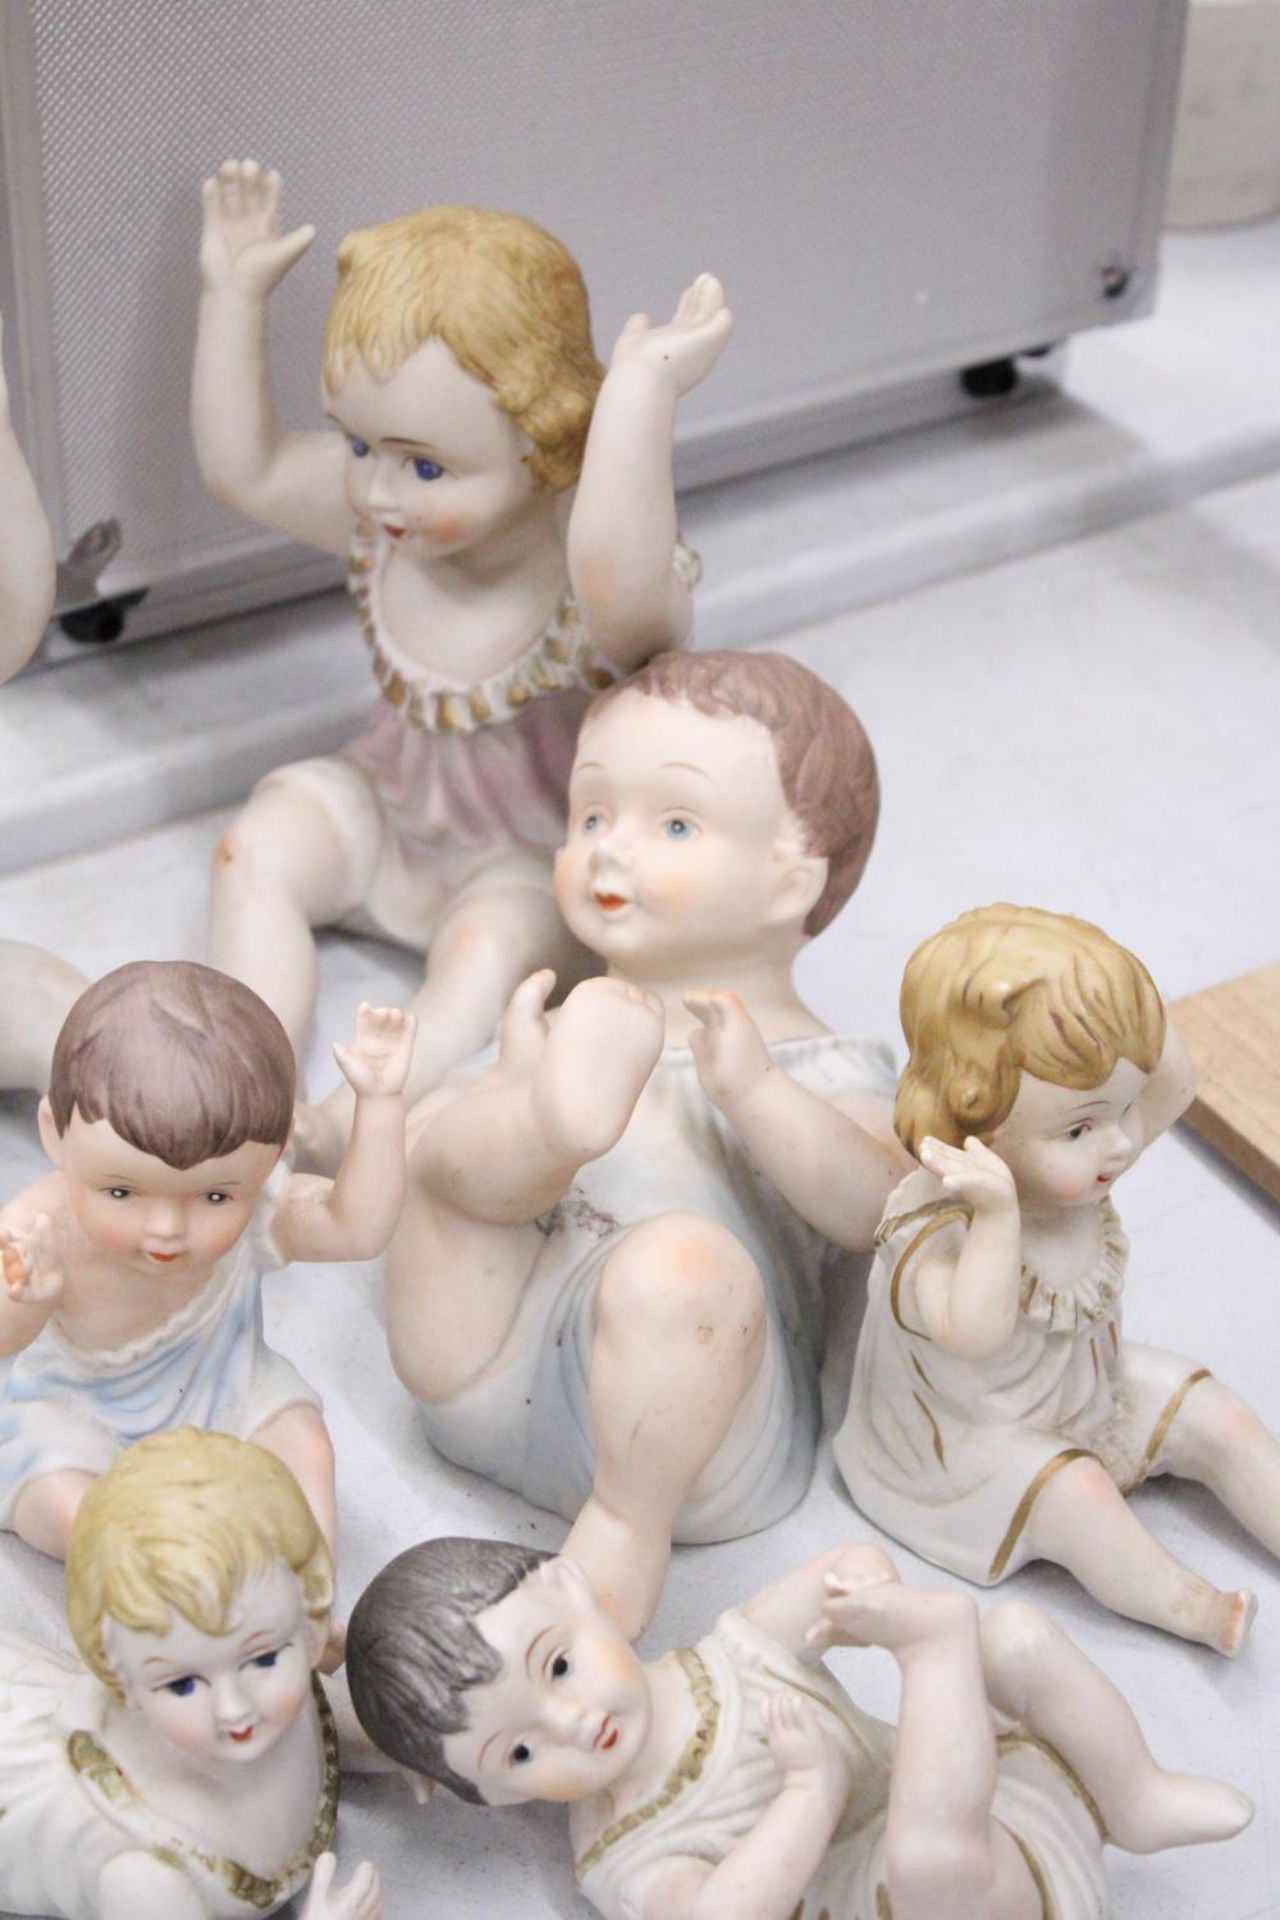 THREE LARGE AND FOUR SMALL ANTIQUE PORCELAIN, BISQUE DOLLS - Image 3 of 5